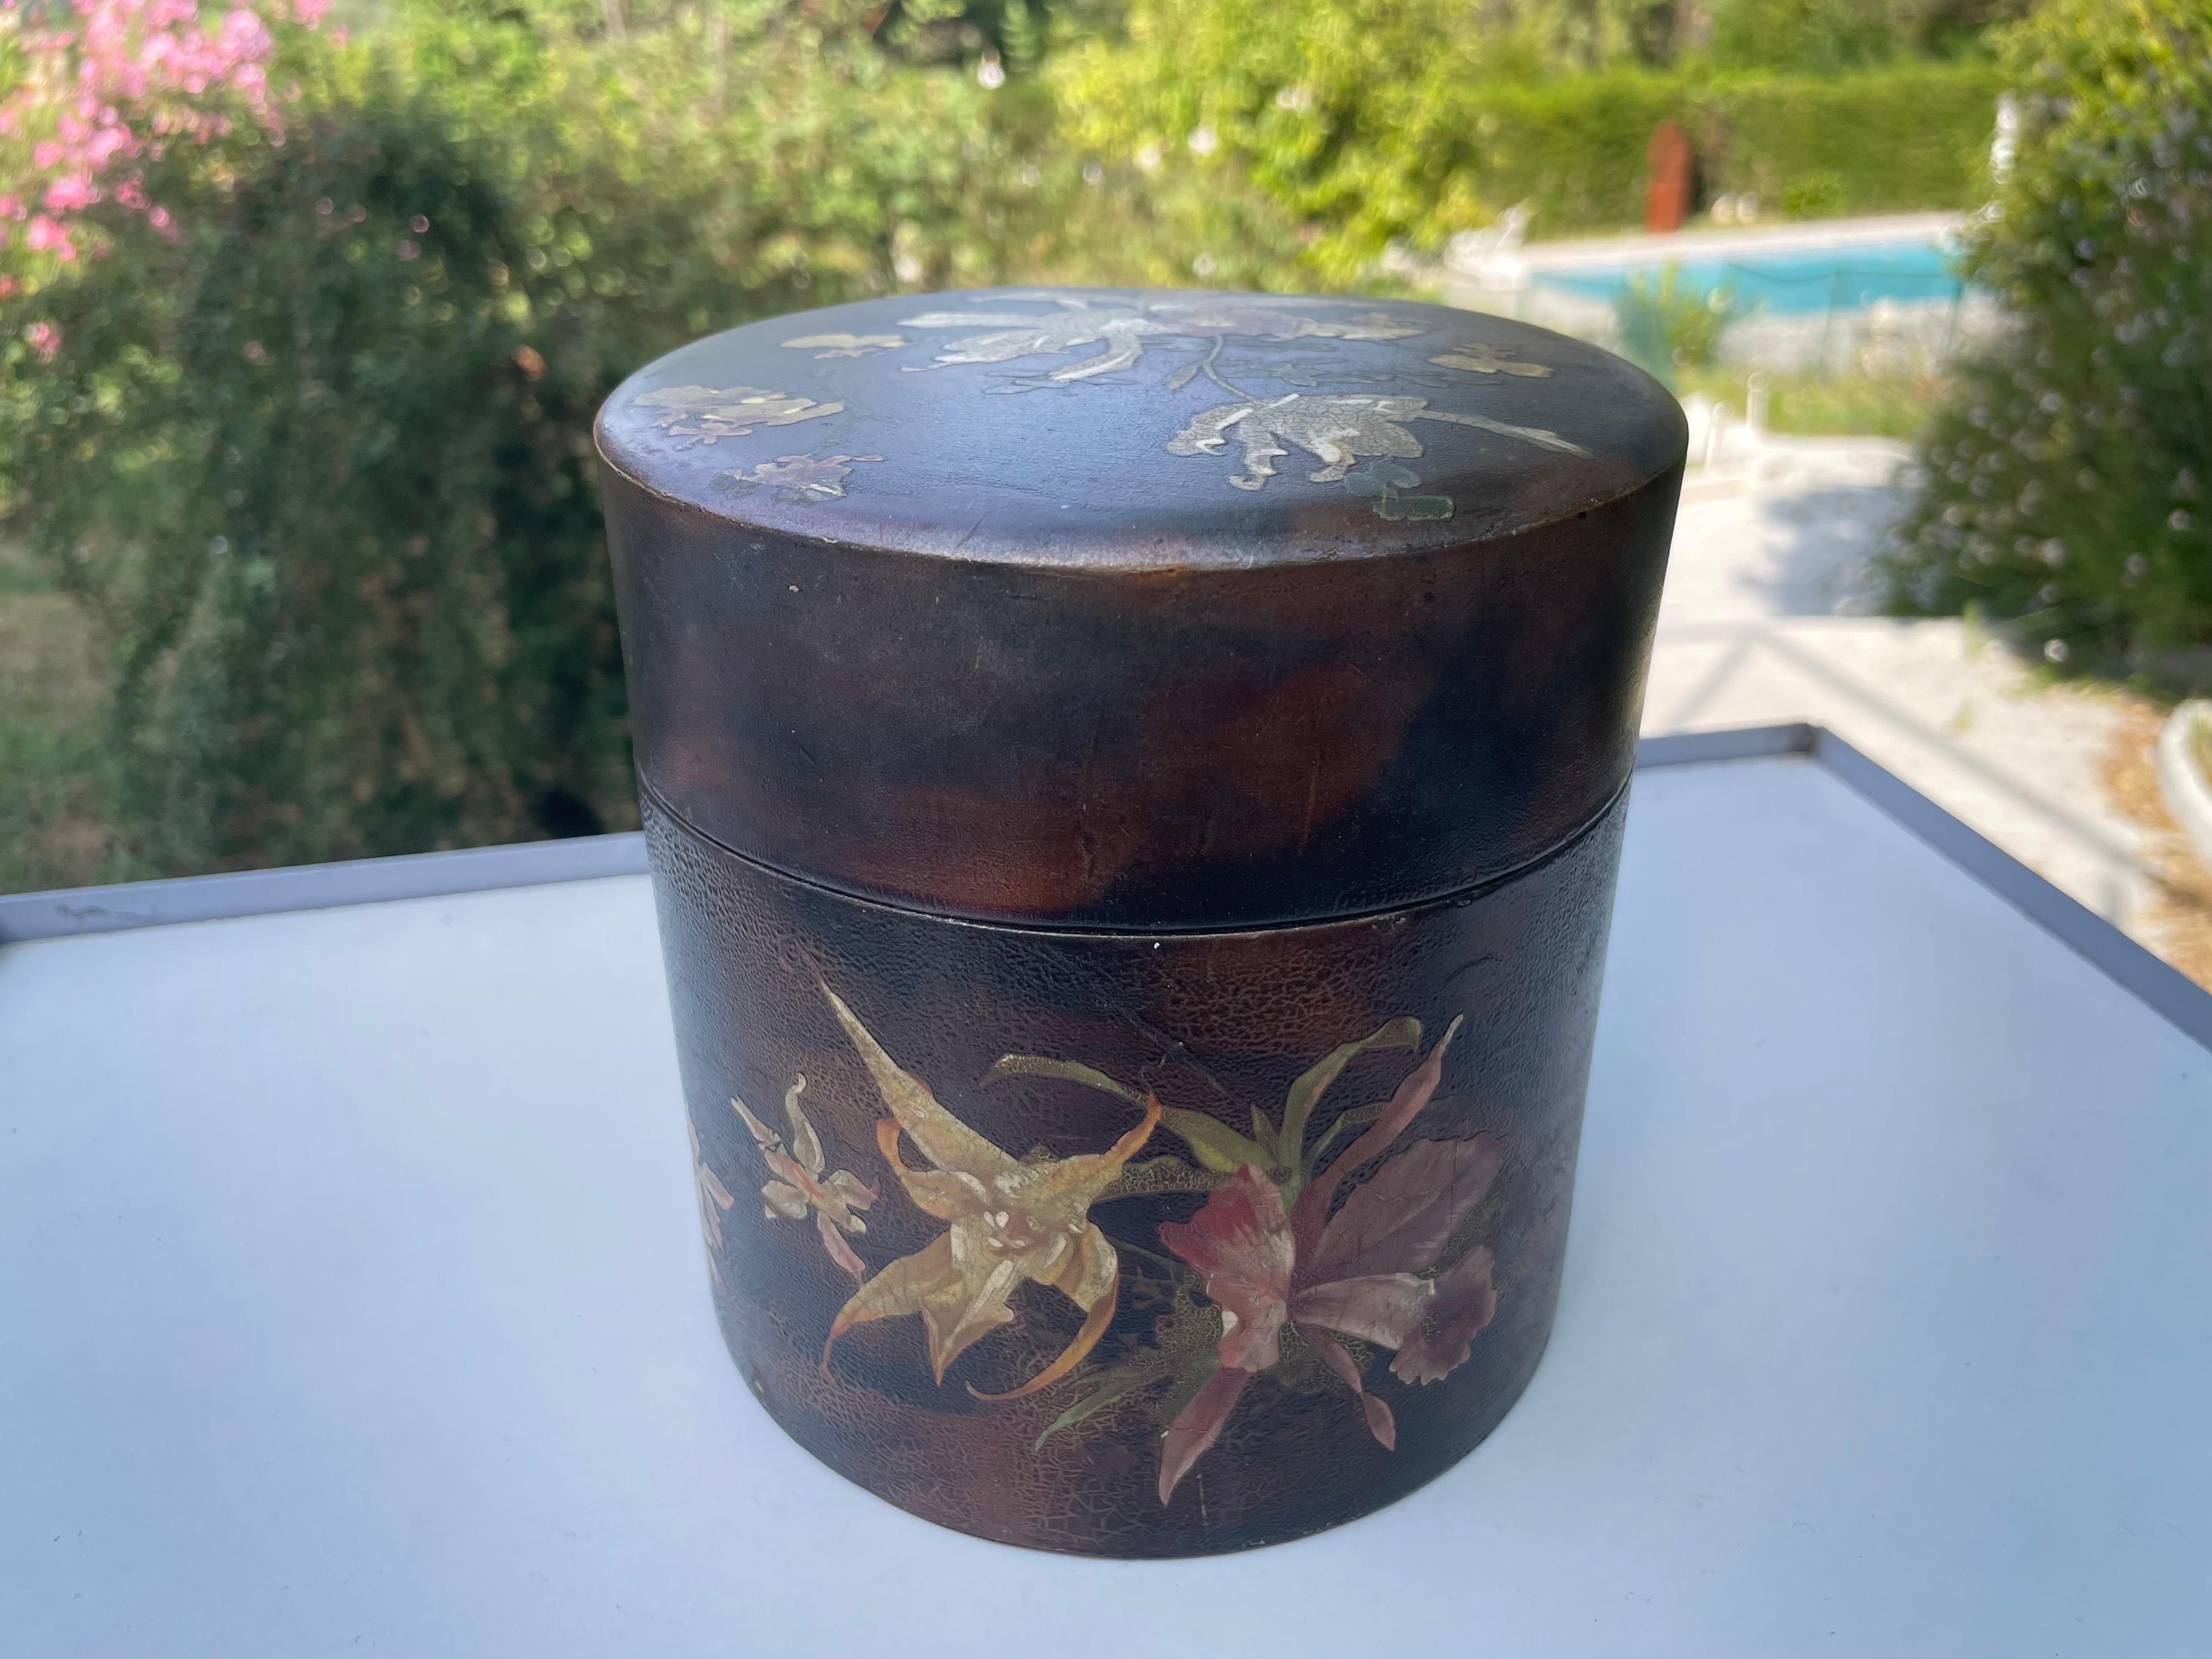 This is a very beautiful Japanese box dating from the beginning of the 20th century. It is lacquered in brown color, with flower patterns.
It was made in Japan.